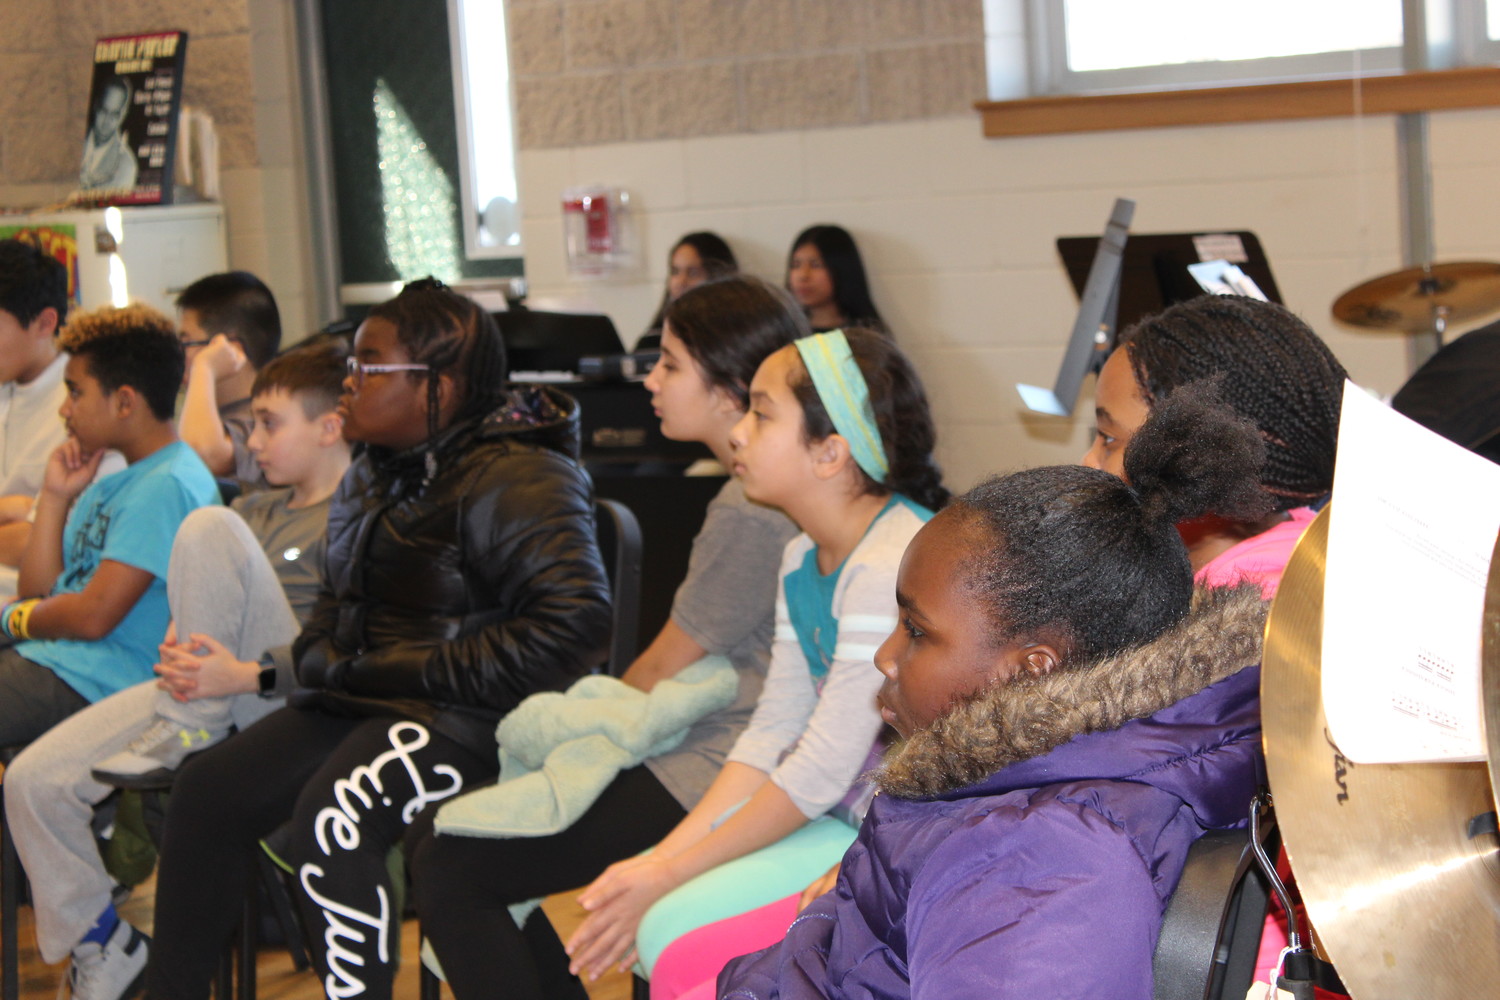 Nine students from the No Place for Hate Committee at West End Elementary School attended a discussion.